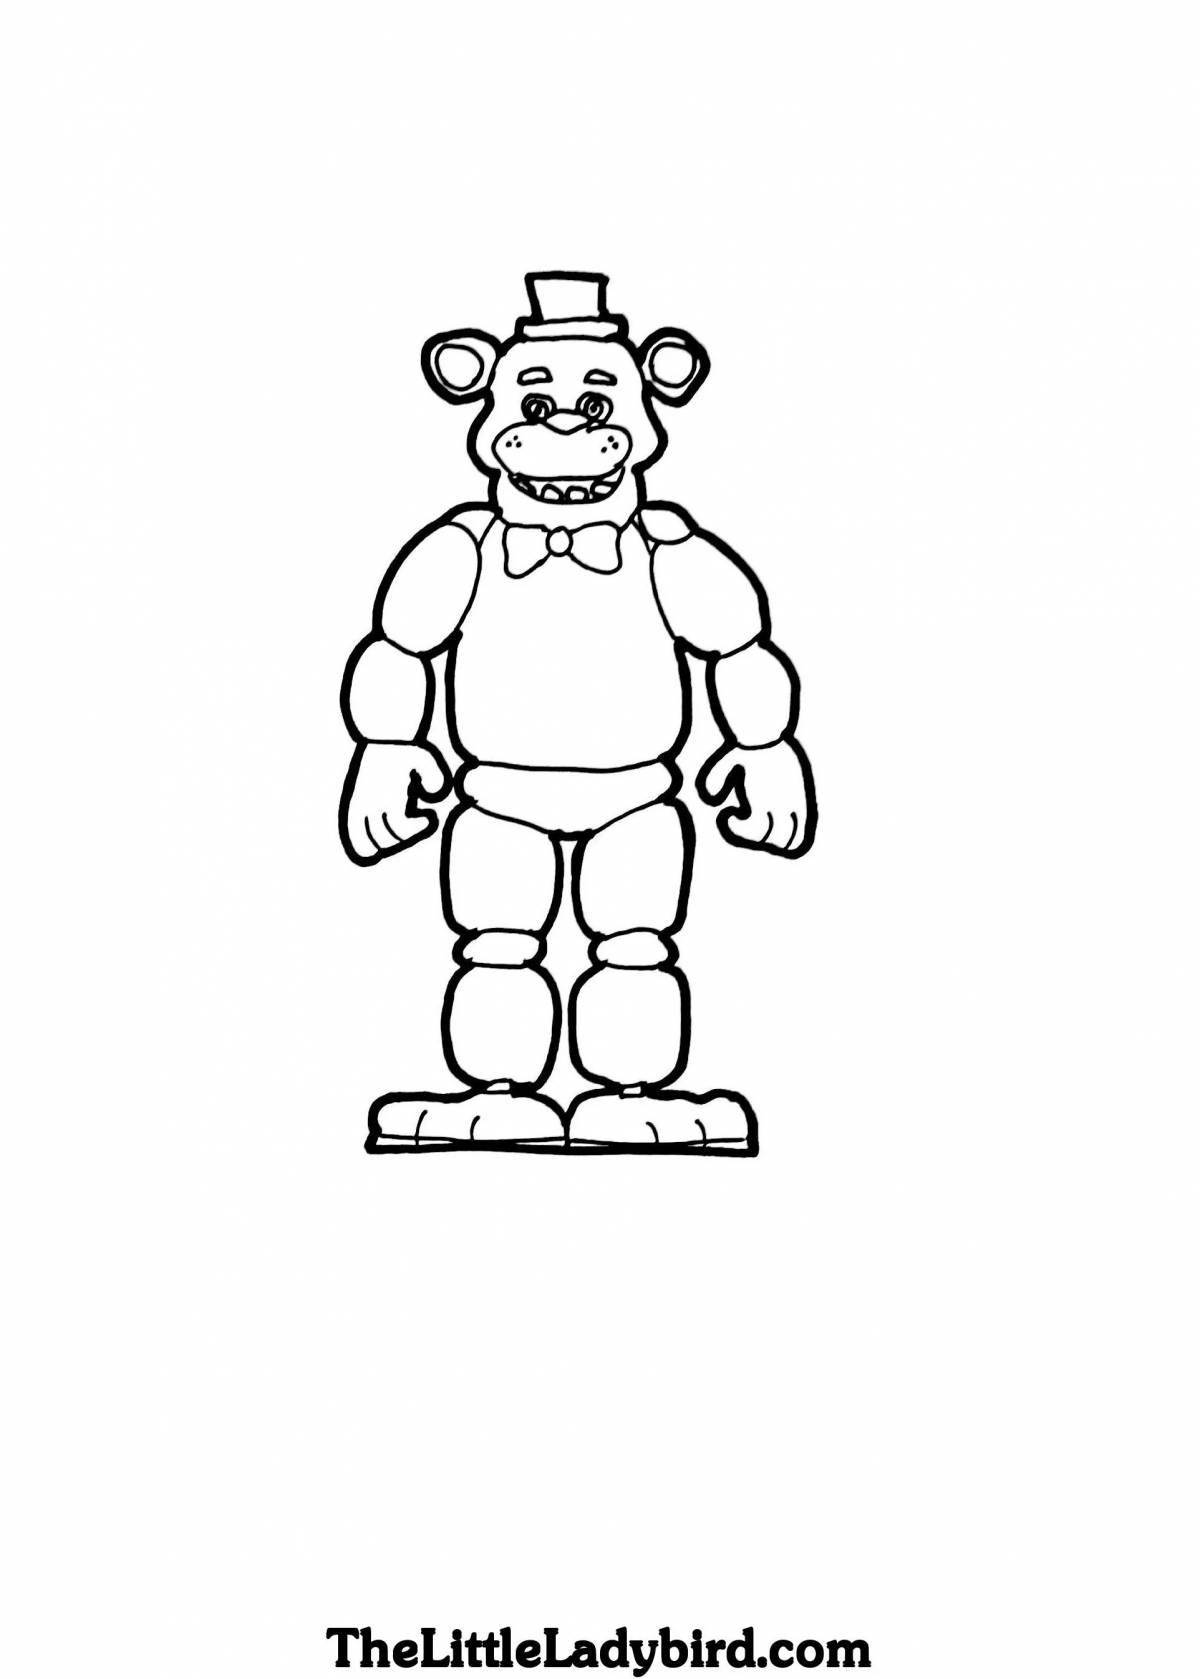 Freddy's playful robot coloring page